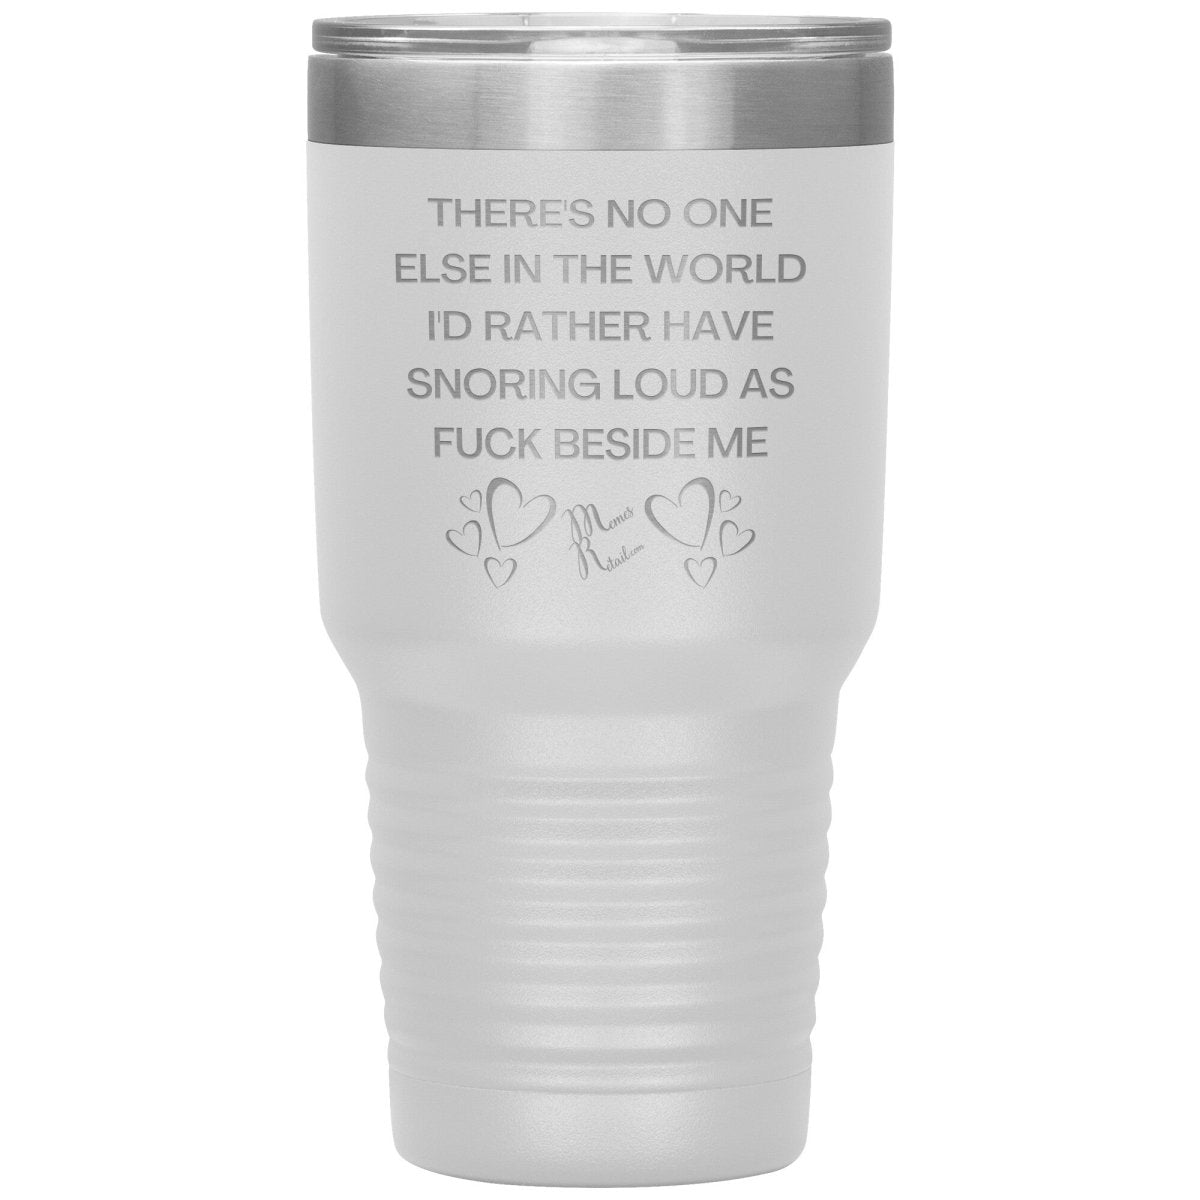 There's No One Else in the World I'd Rather Have Snoring Loud, 30oz Insulated Tumbler / White - MemesRetail.com